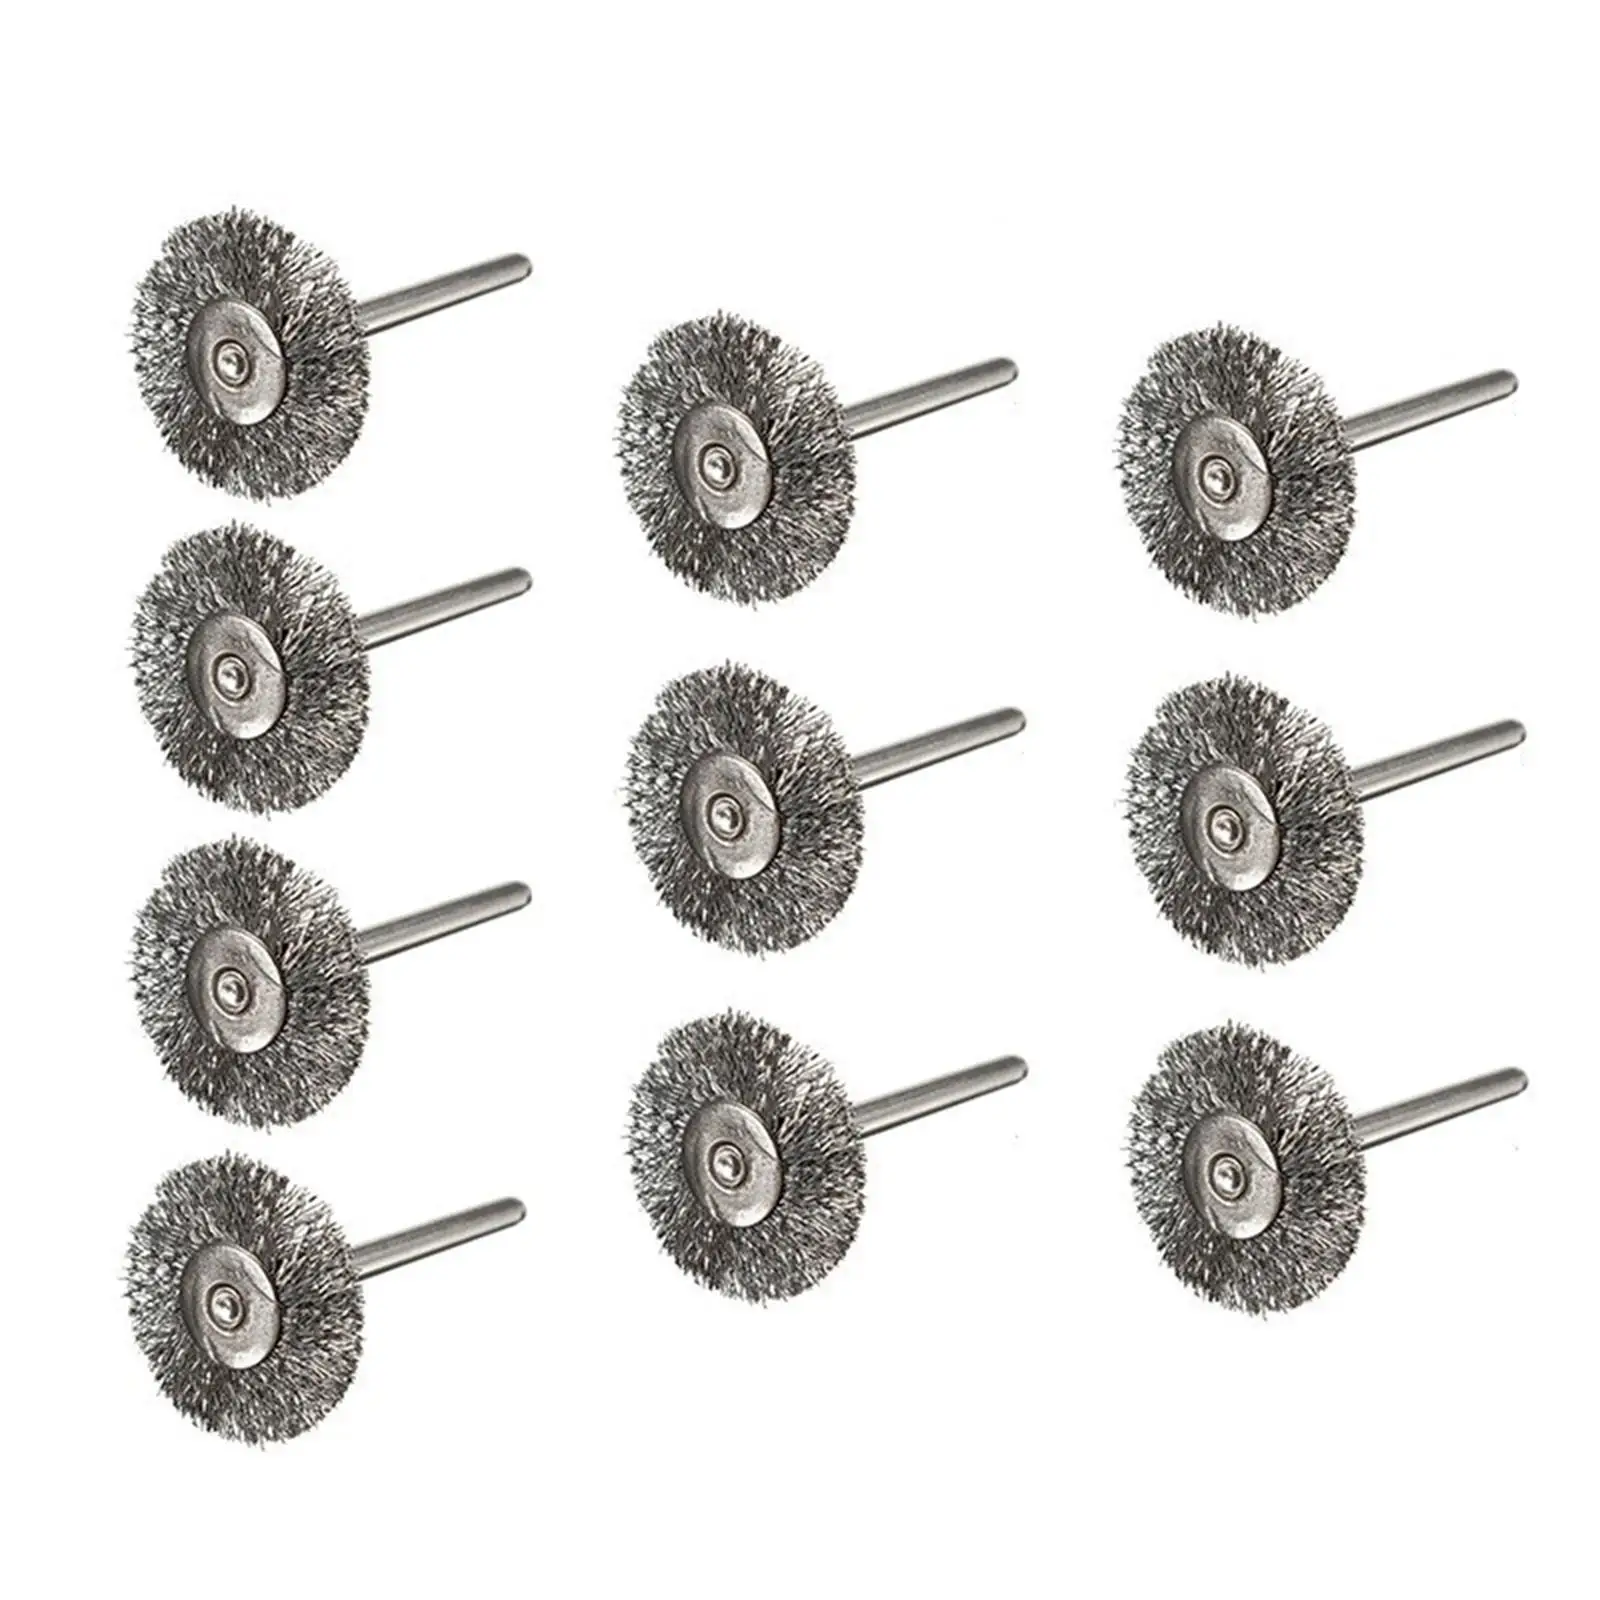 10x 2.2cm Steel wire Brush for Drill Coarse Crimped Brush Replacement